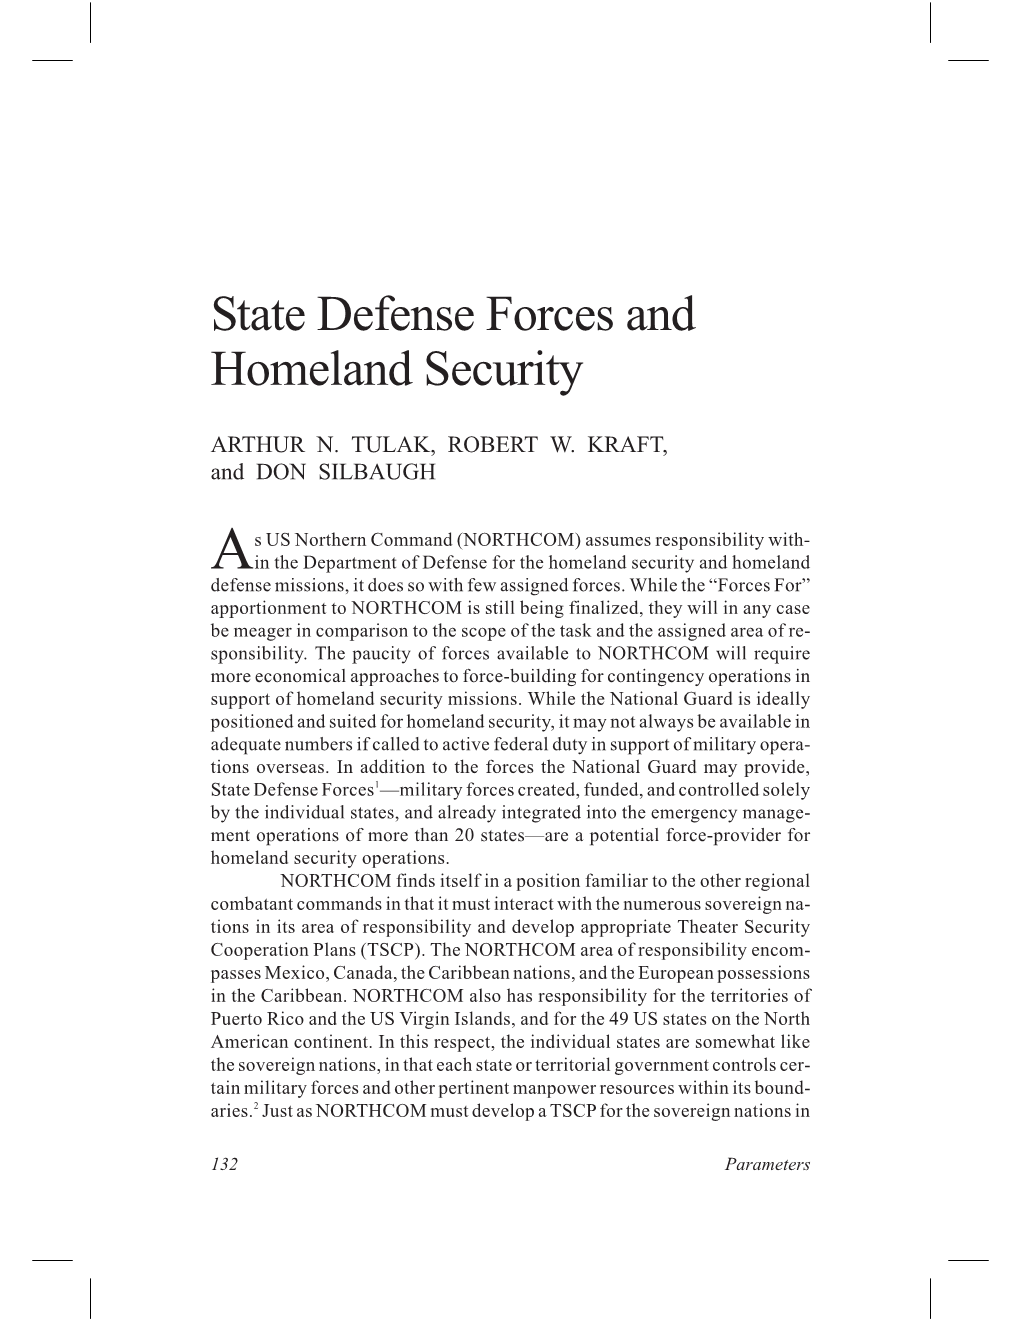 State Defense Forces and Homeland Security